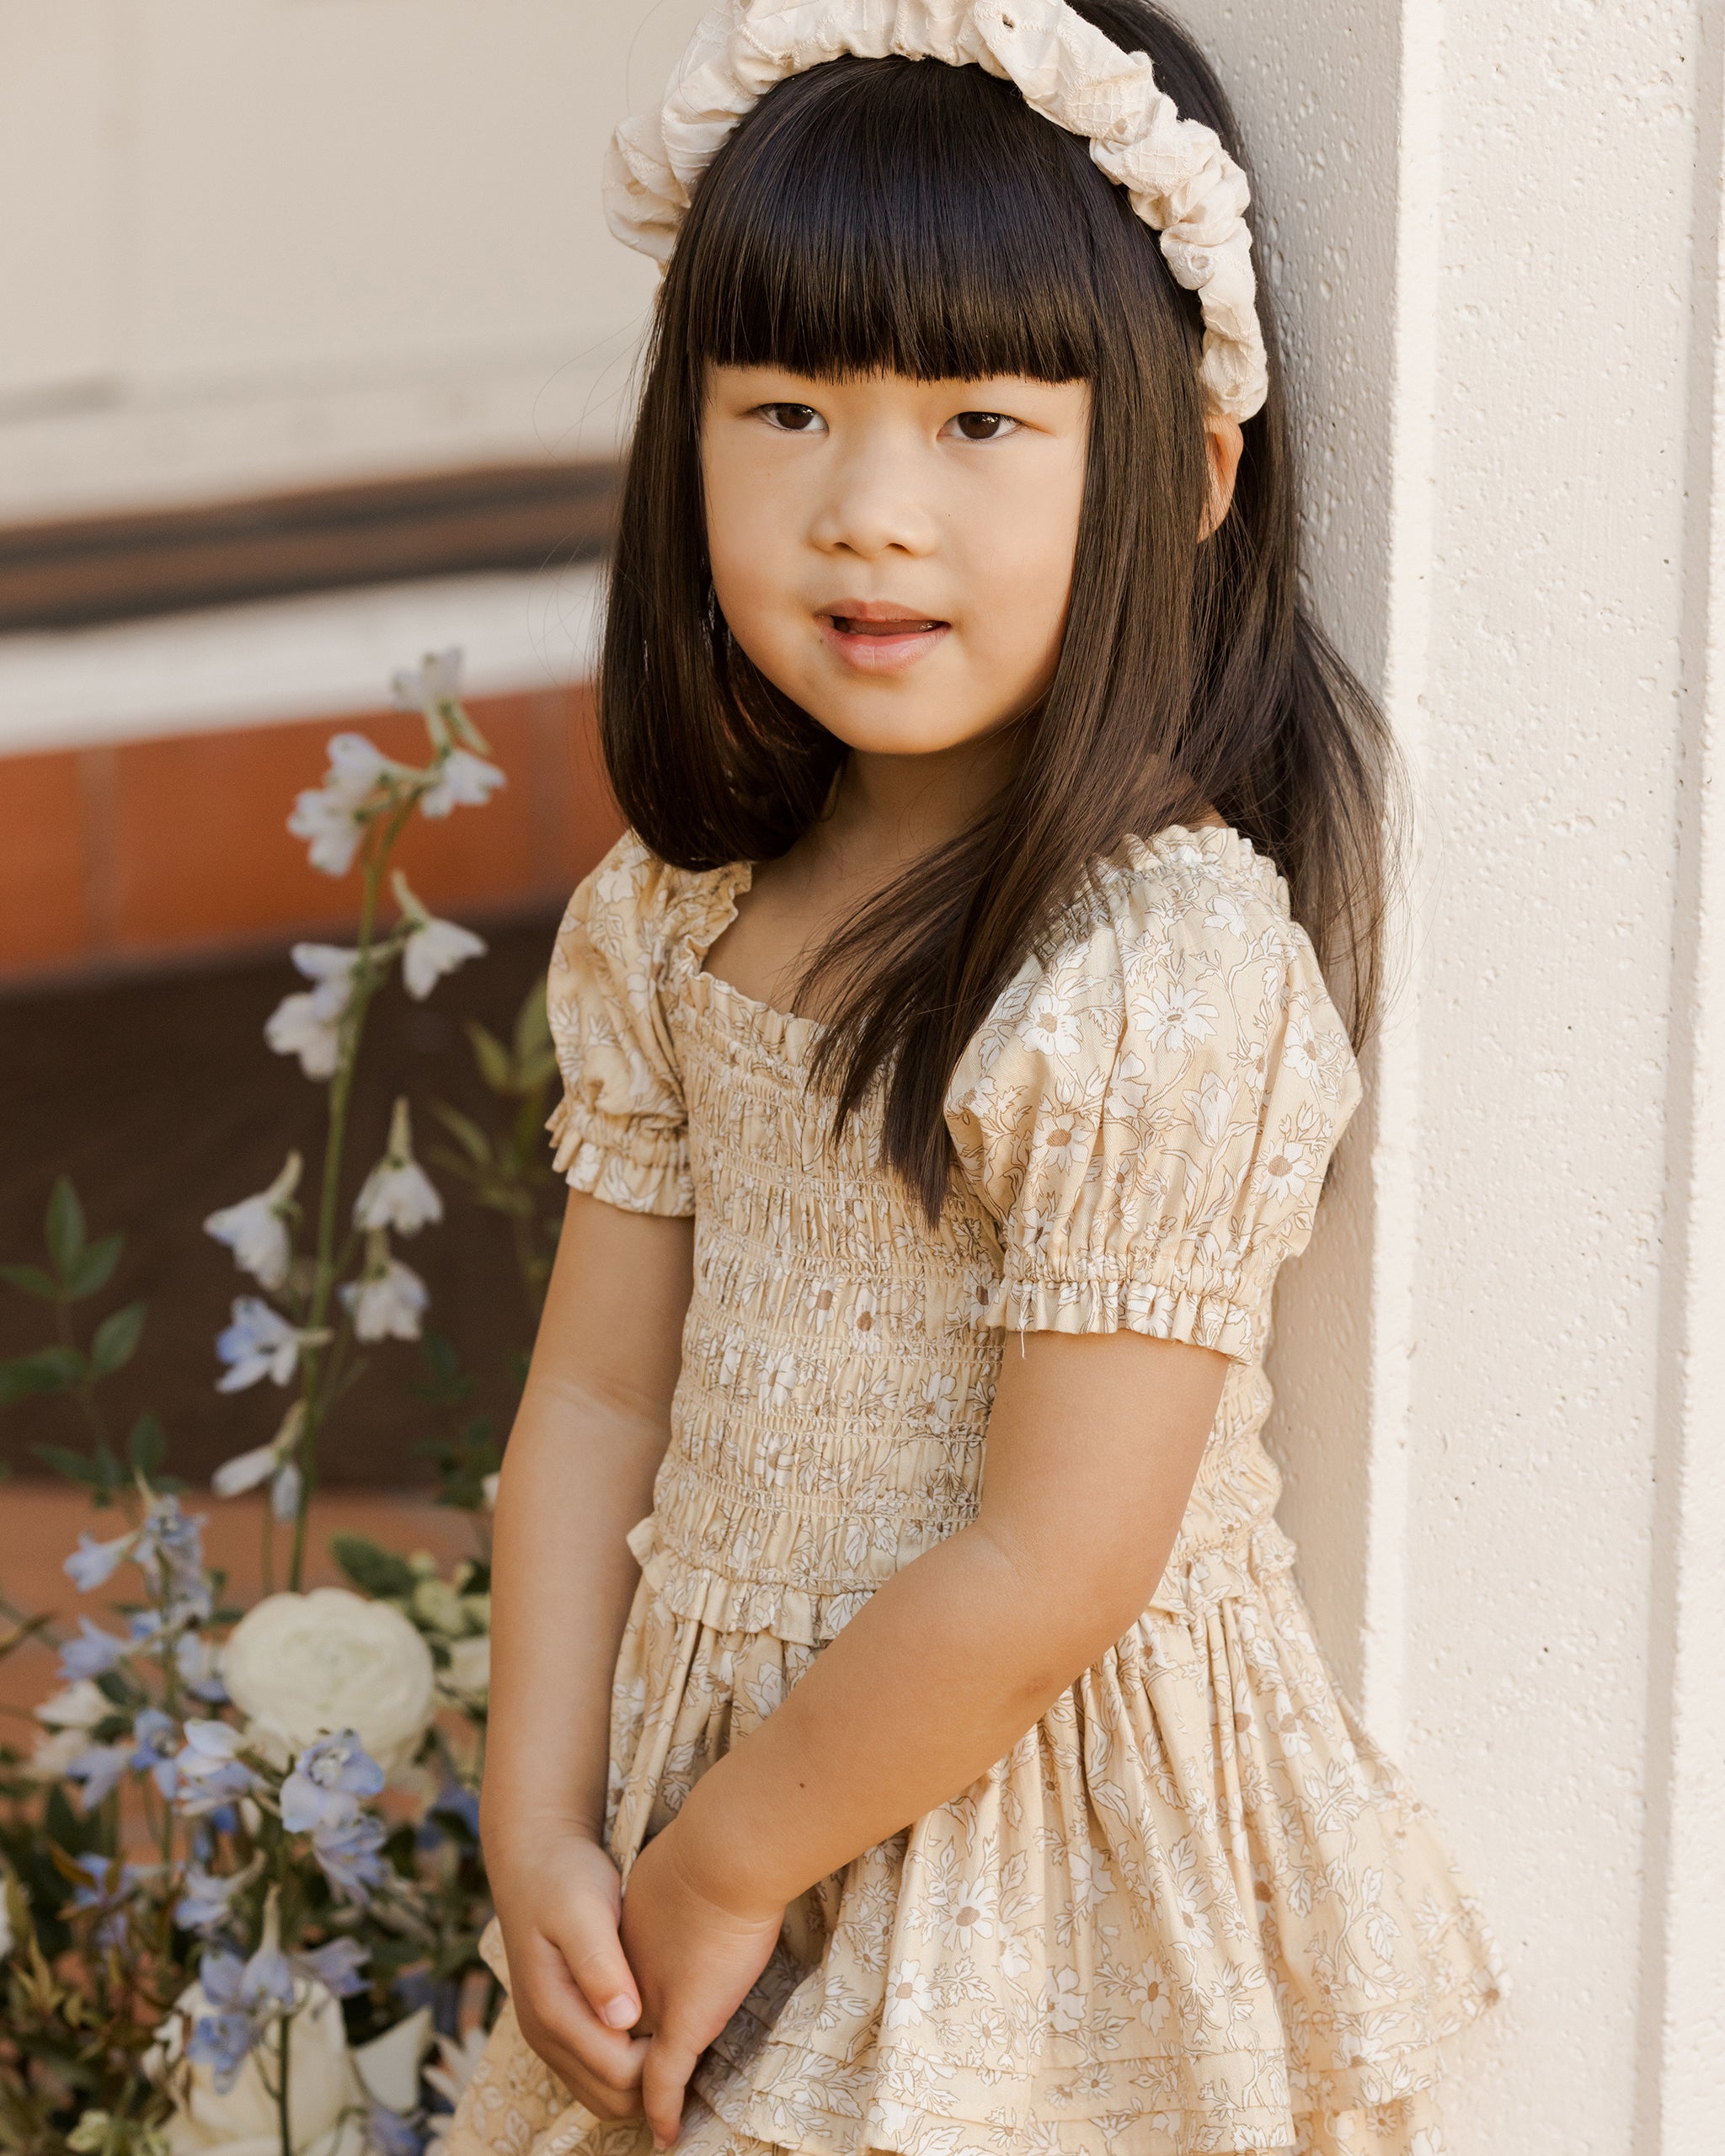 Cosette Dress || Lemon Fields - Rylee + Cru | Kids Clothes | Trendy Baby Clothes | Modern Infant Outfits |